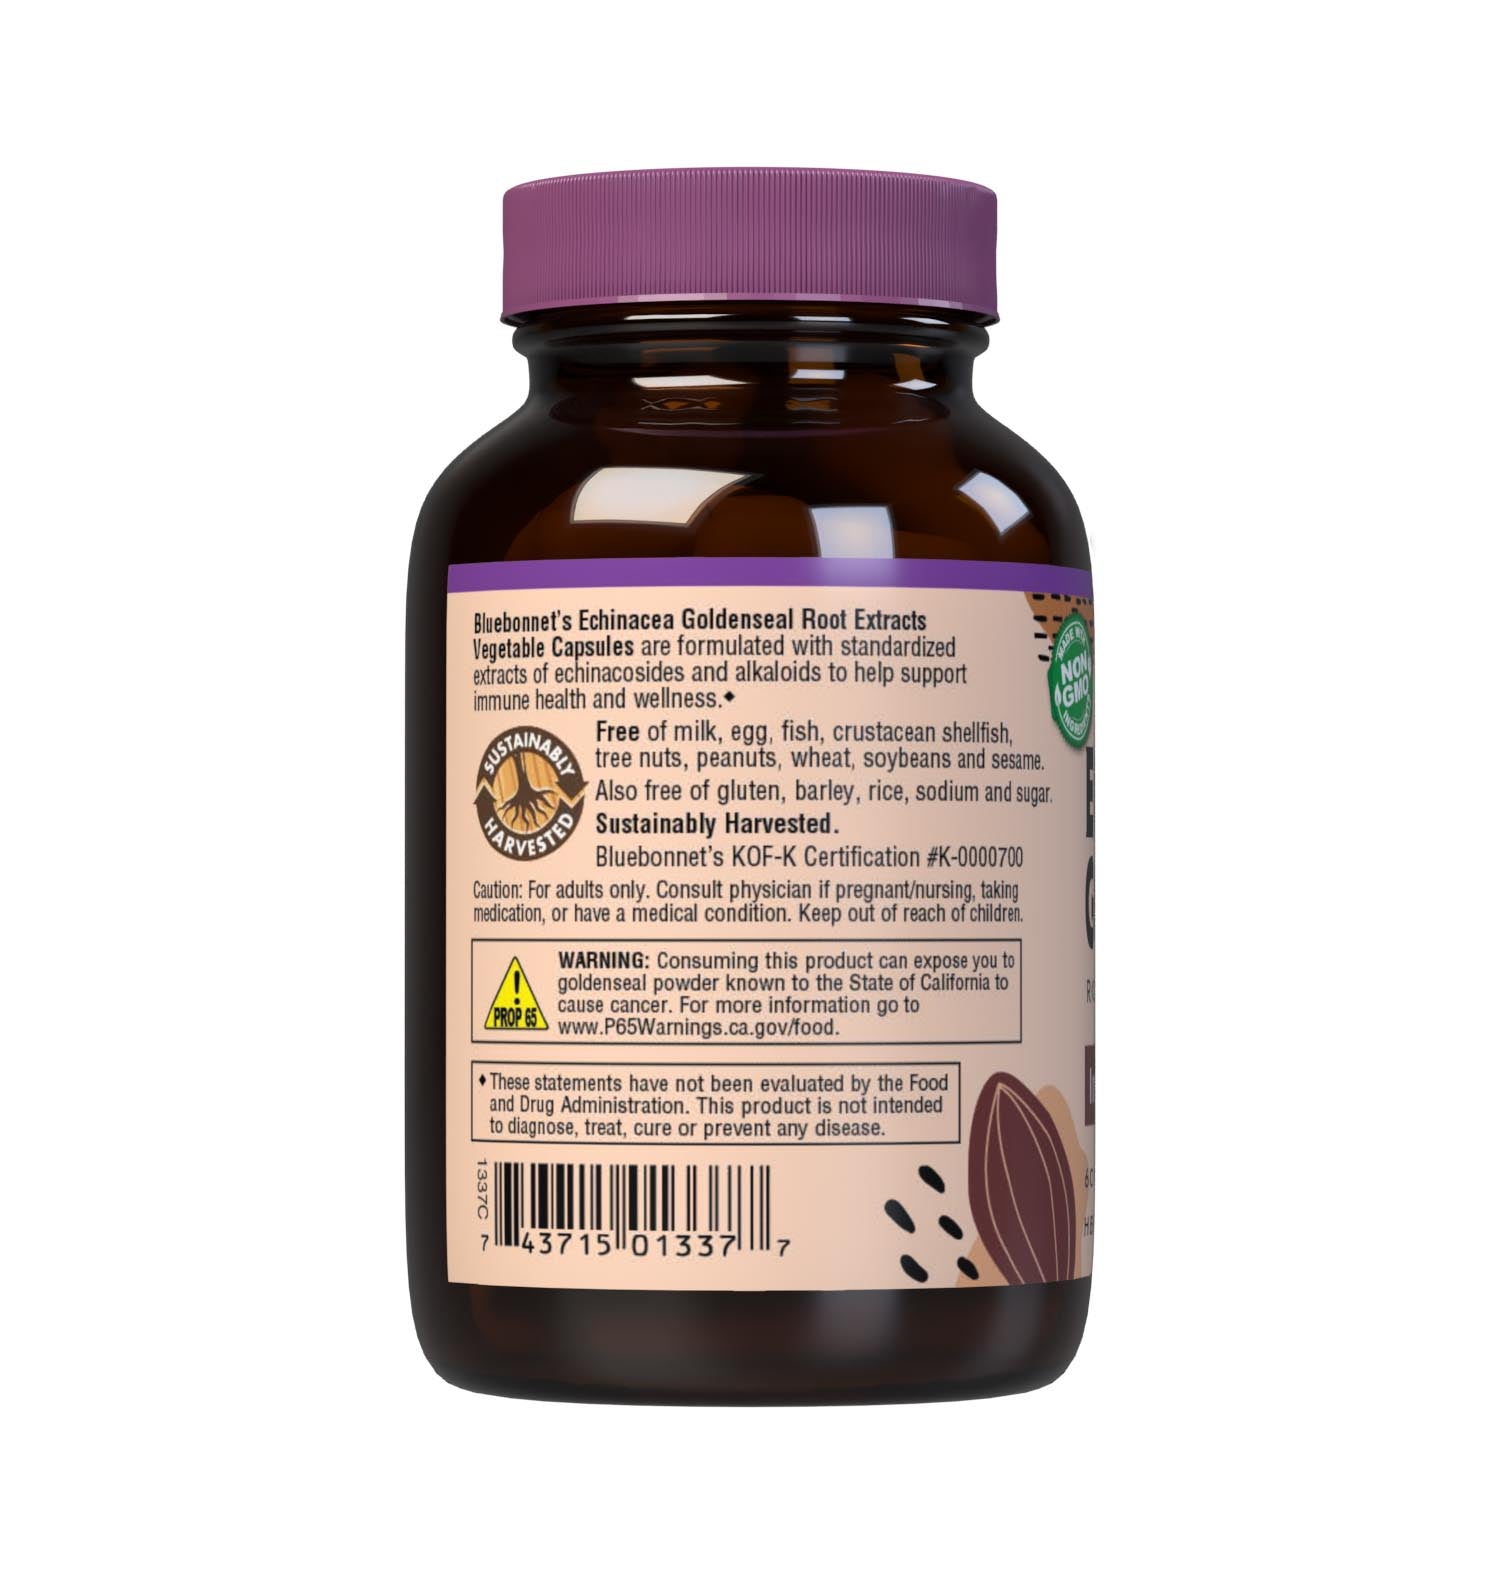 Bluebonnet’s Echinacea Goldenseal Root Extract 60 Vegetable Capsules contain a standardized extract of echinacosides and alkaloids, the most researched active constituents found in echinacea and goldenseal, respectively. A clean and gentle water-based extraction method is employed to capture and preserve both echinacea and goldenseal’s most valuable components. Description panel. #size_60 count